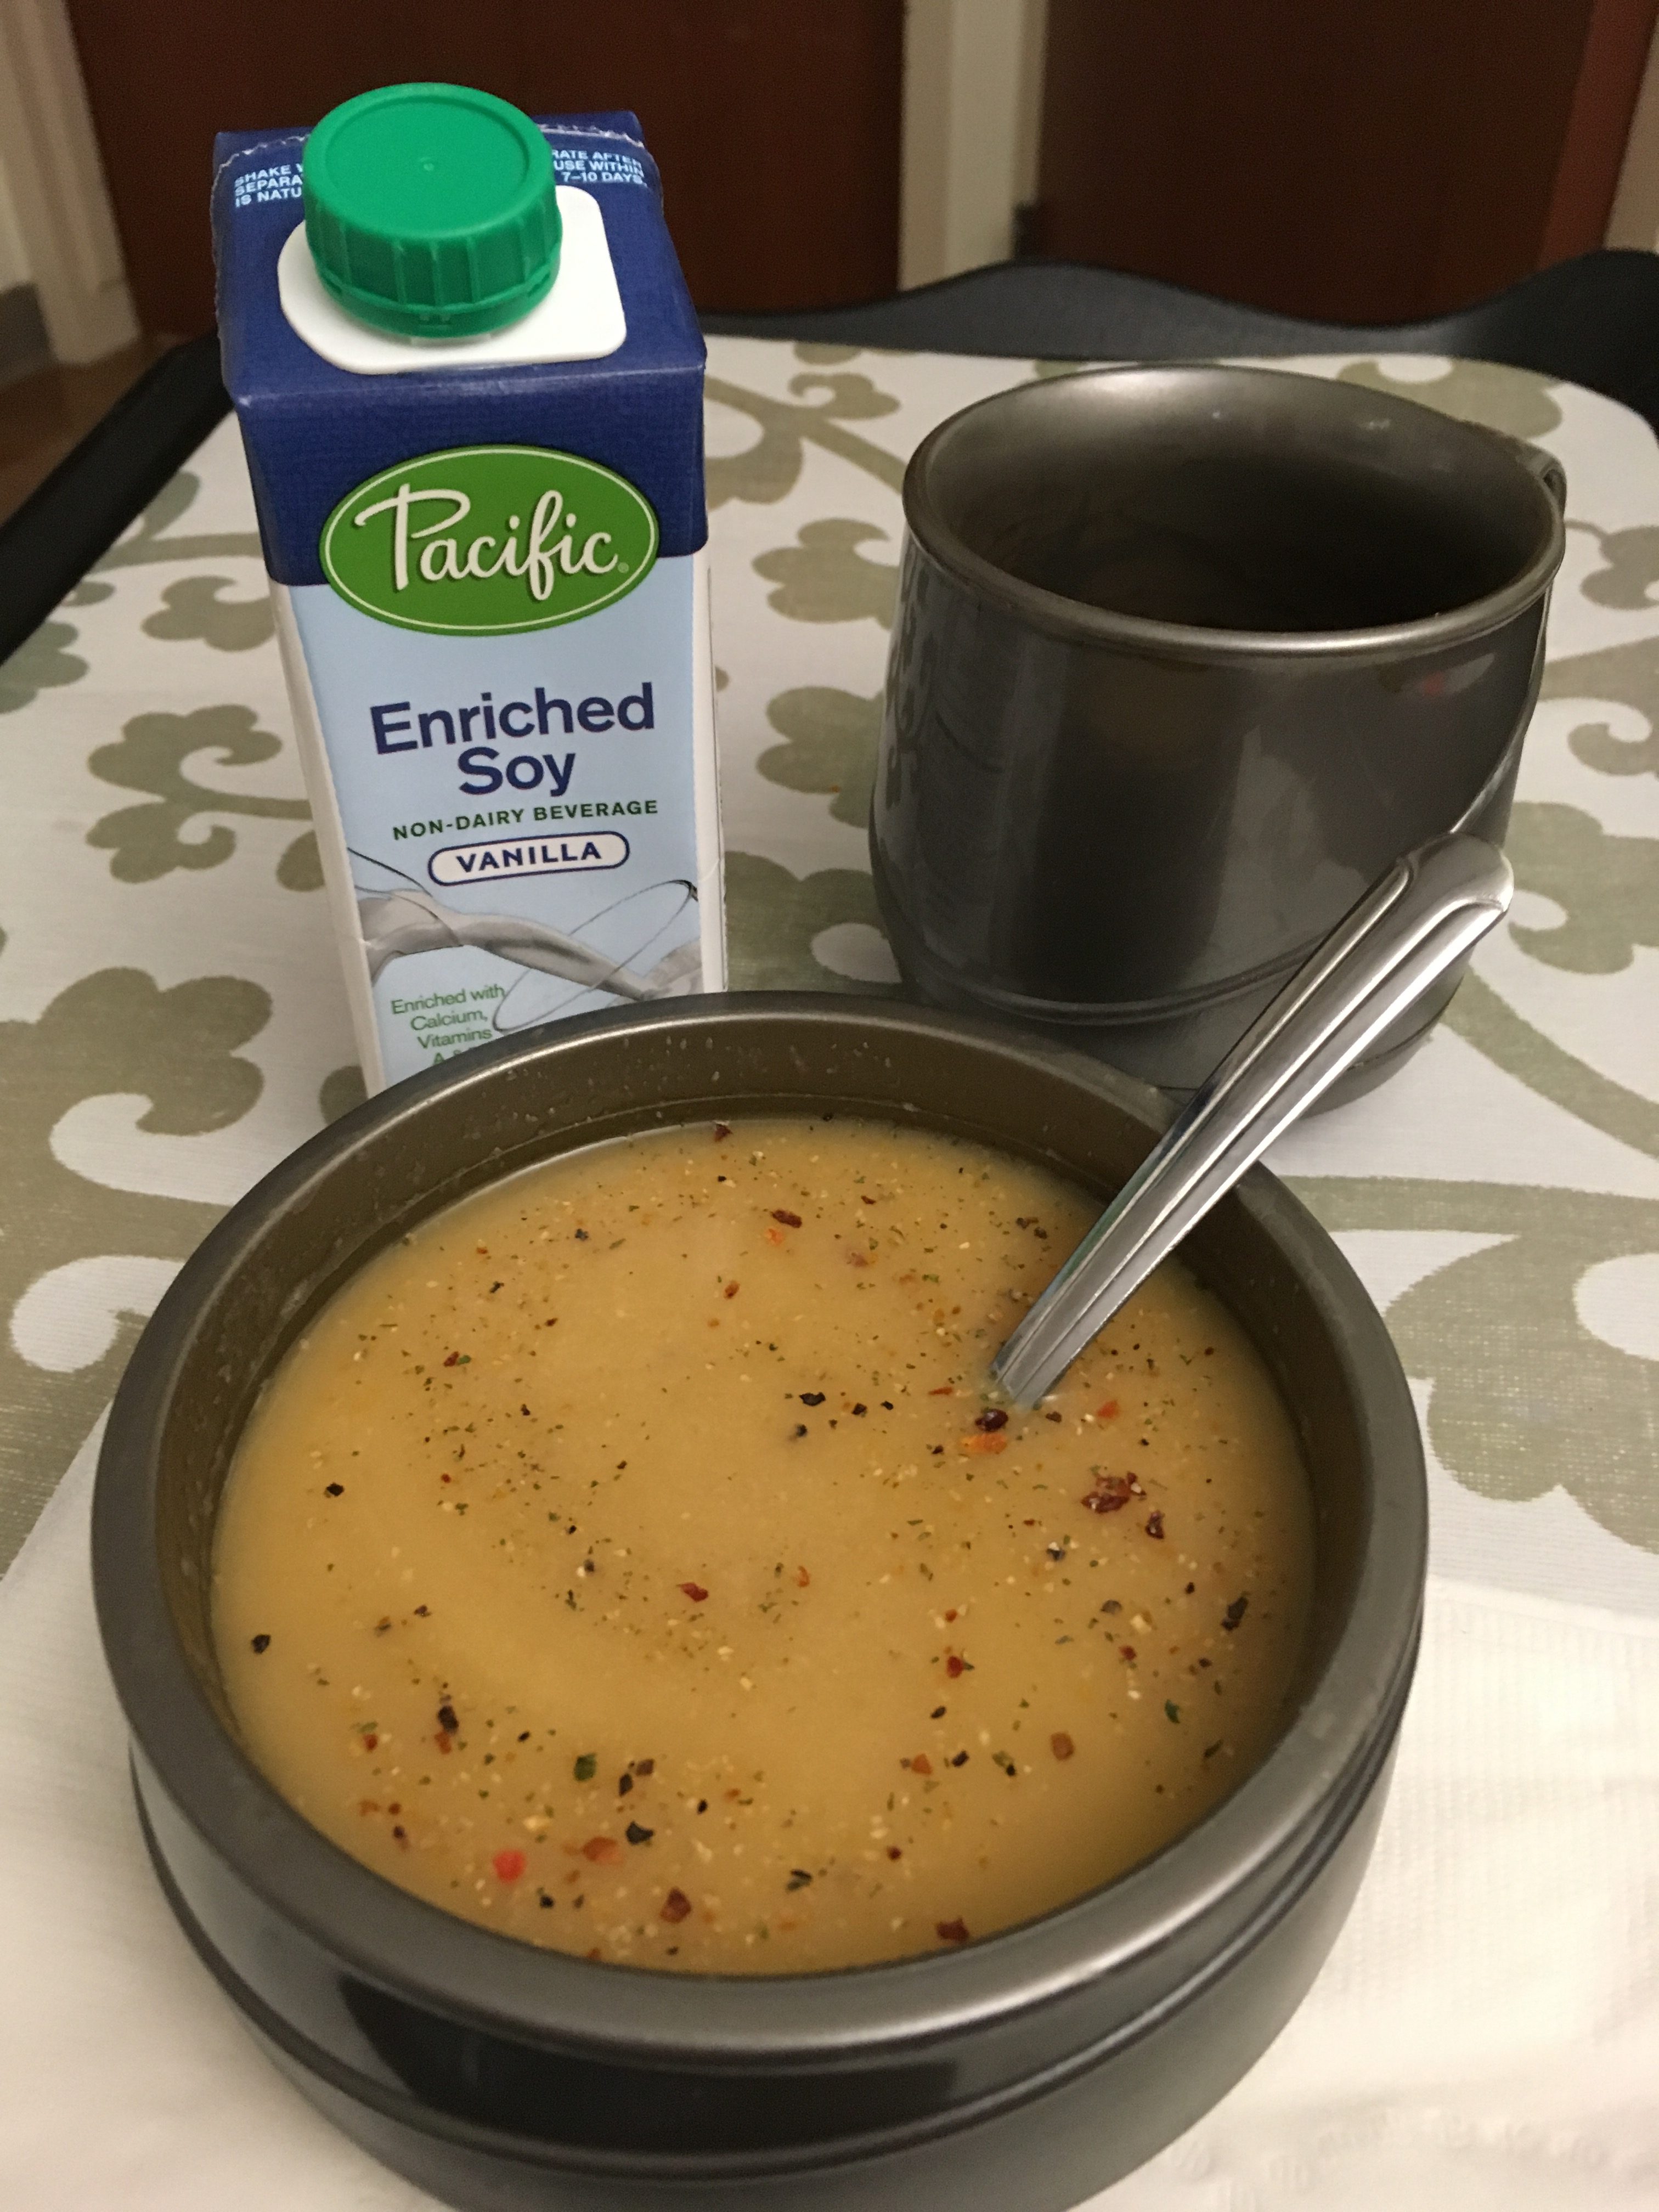 Soup, soy drink, and mug of coffee on table in hospital